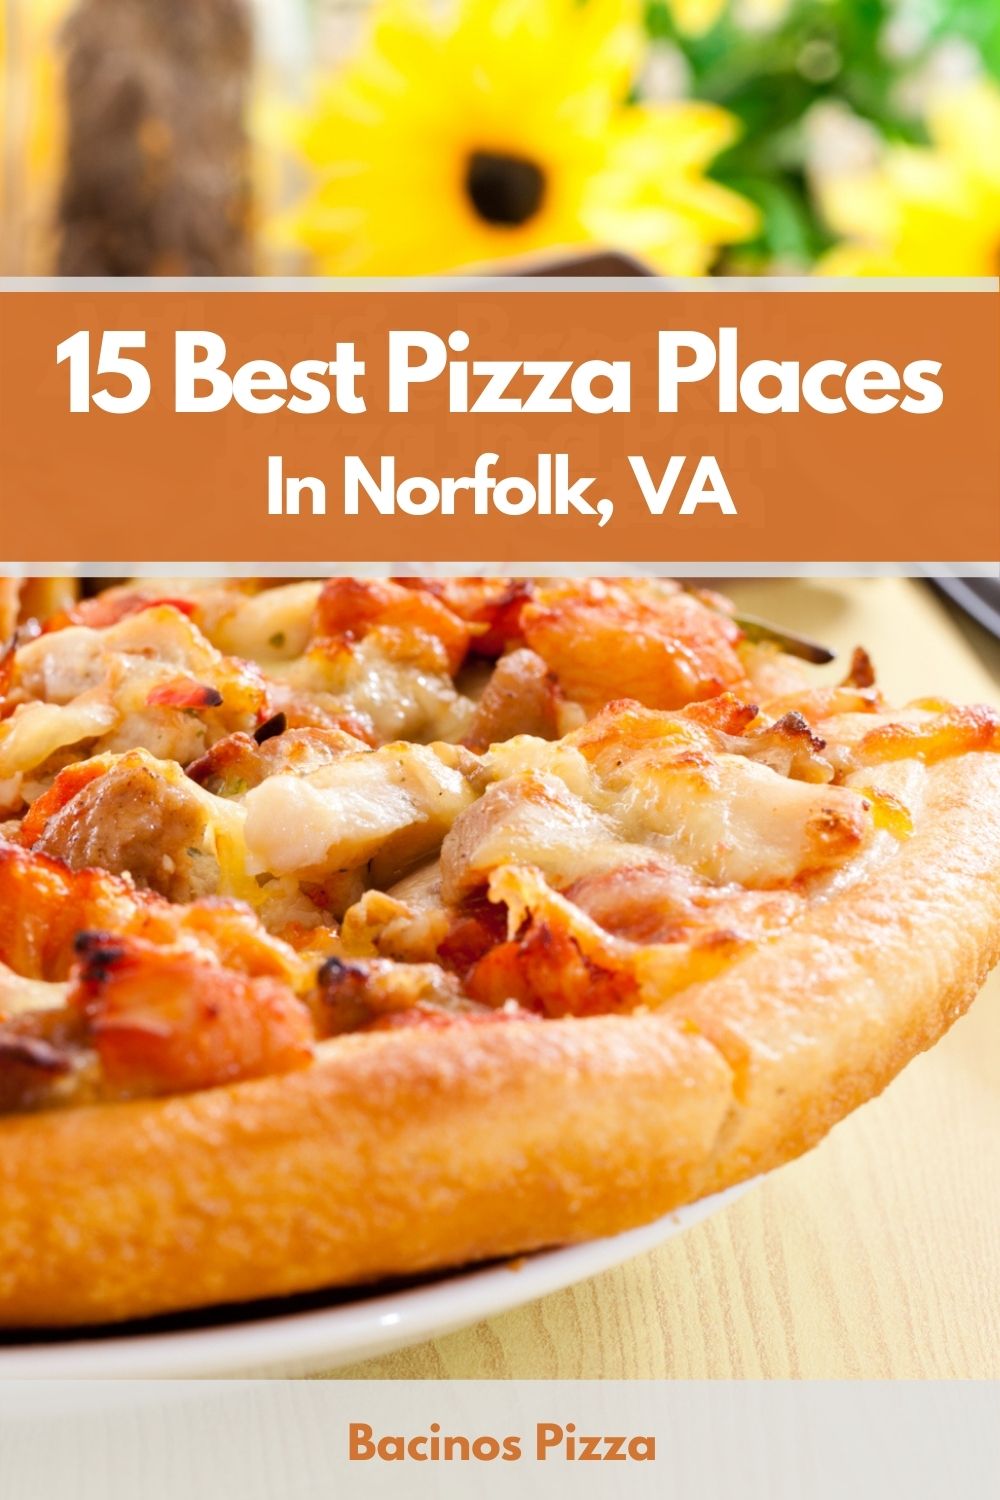 15 Best Pizza Places In Norfolk, VA pin